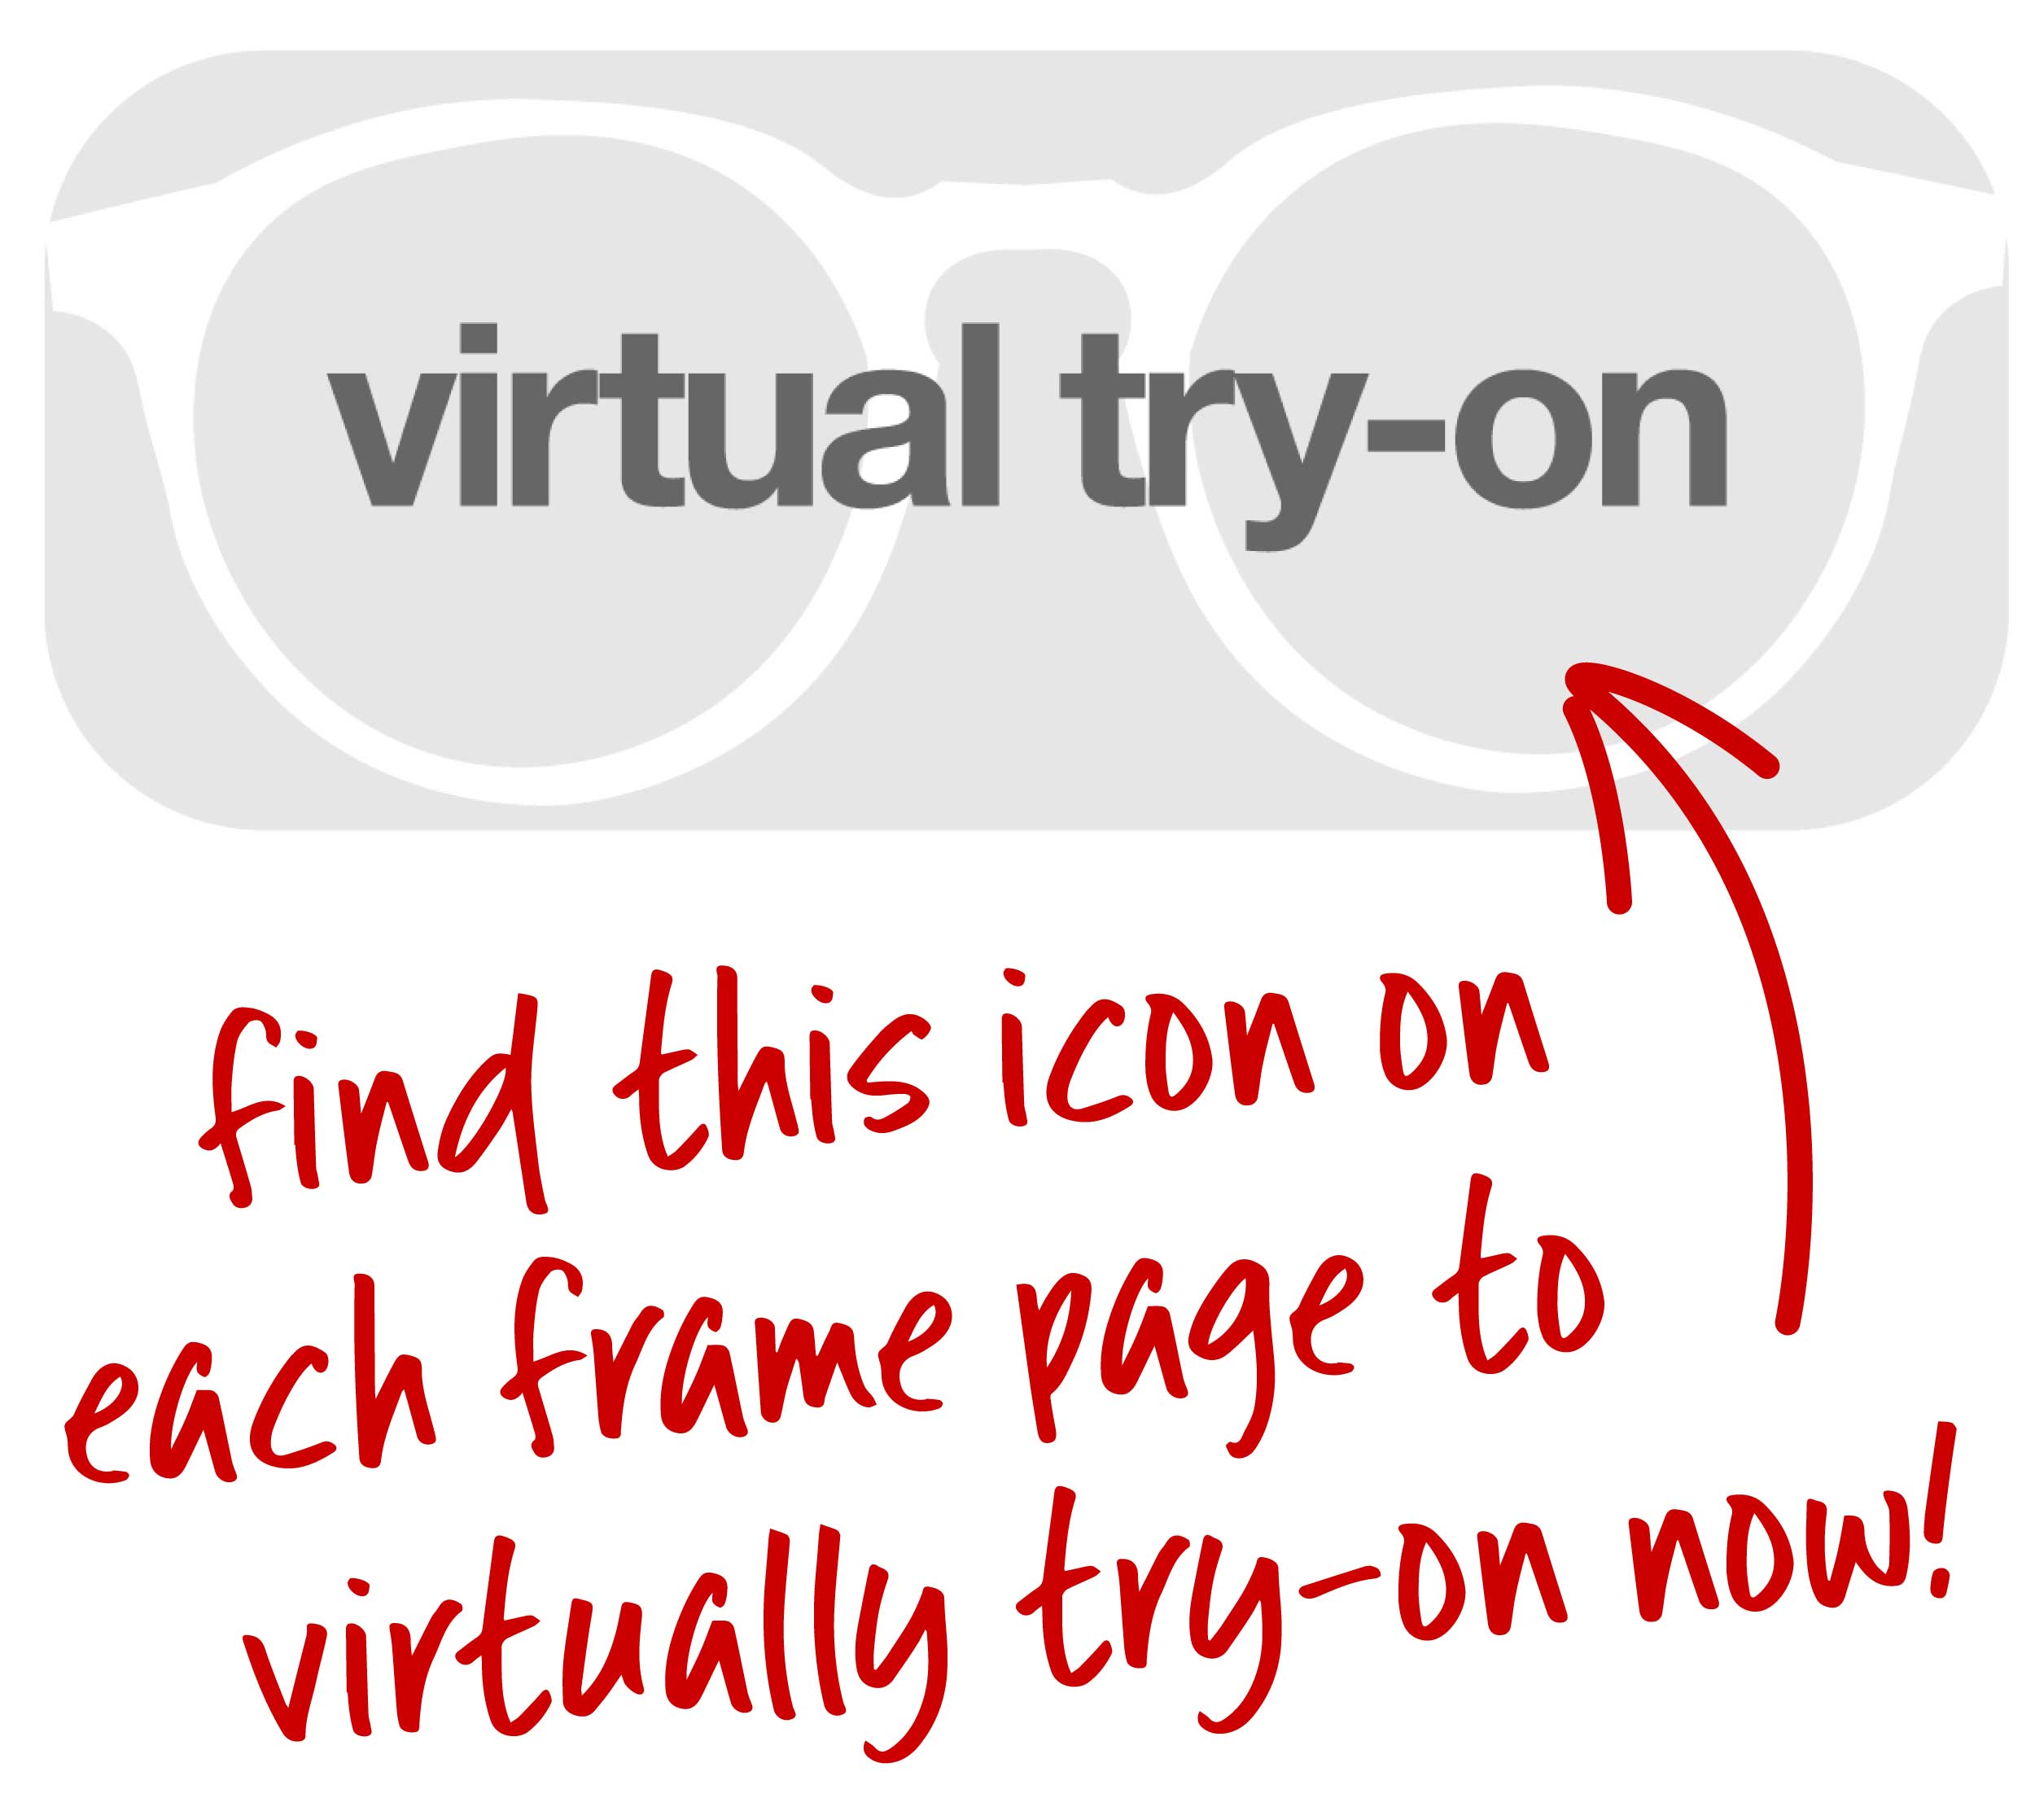 find this icon on each frame page to virtually try-on now!